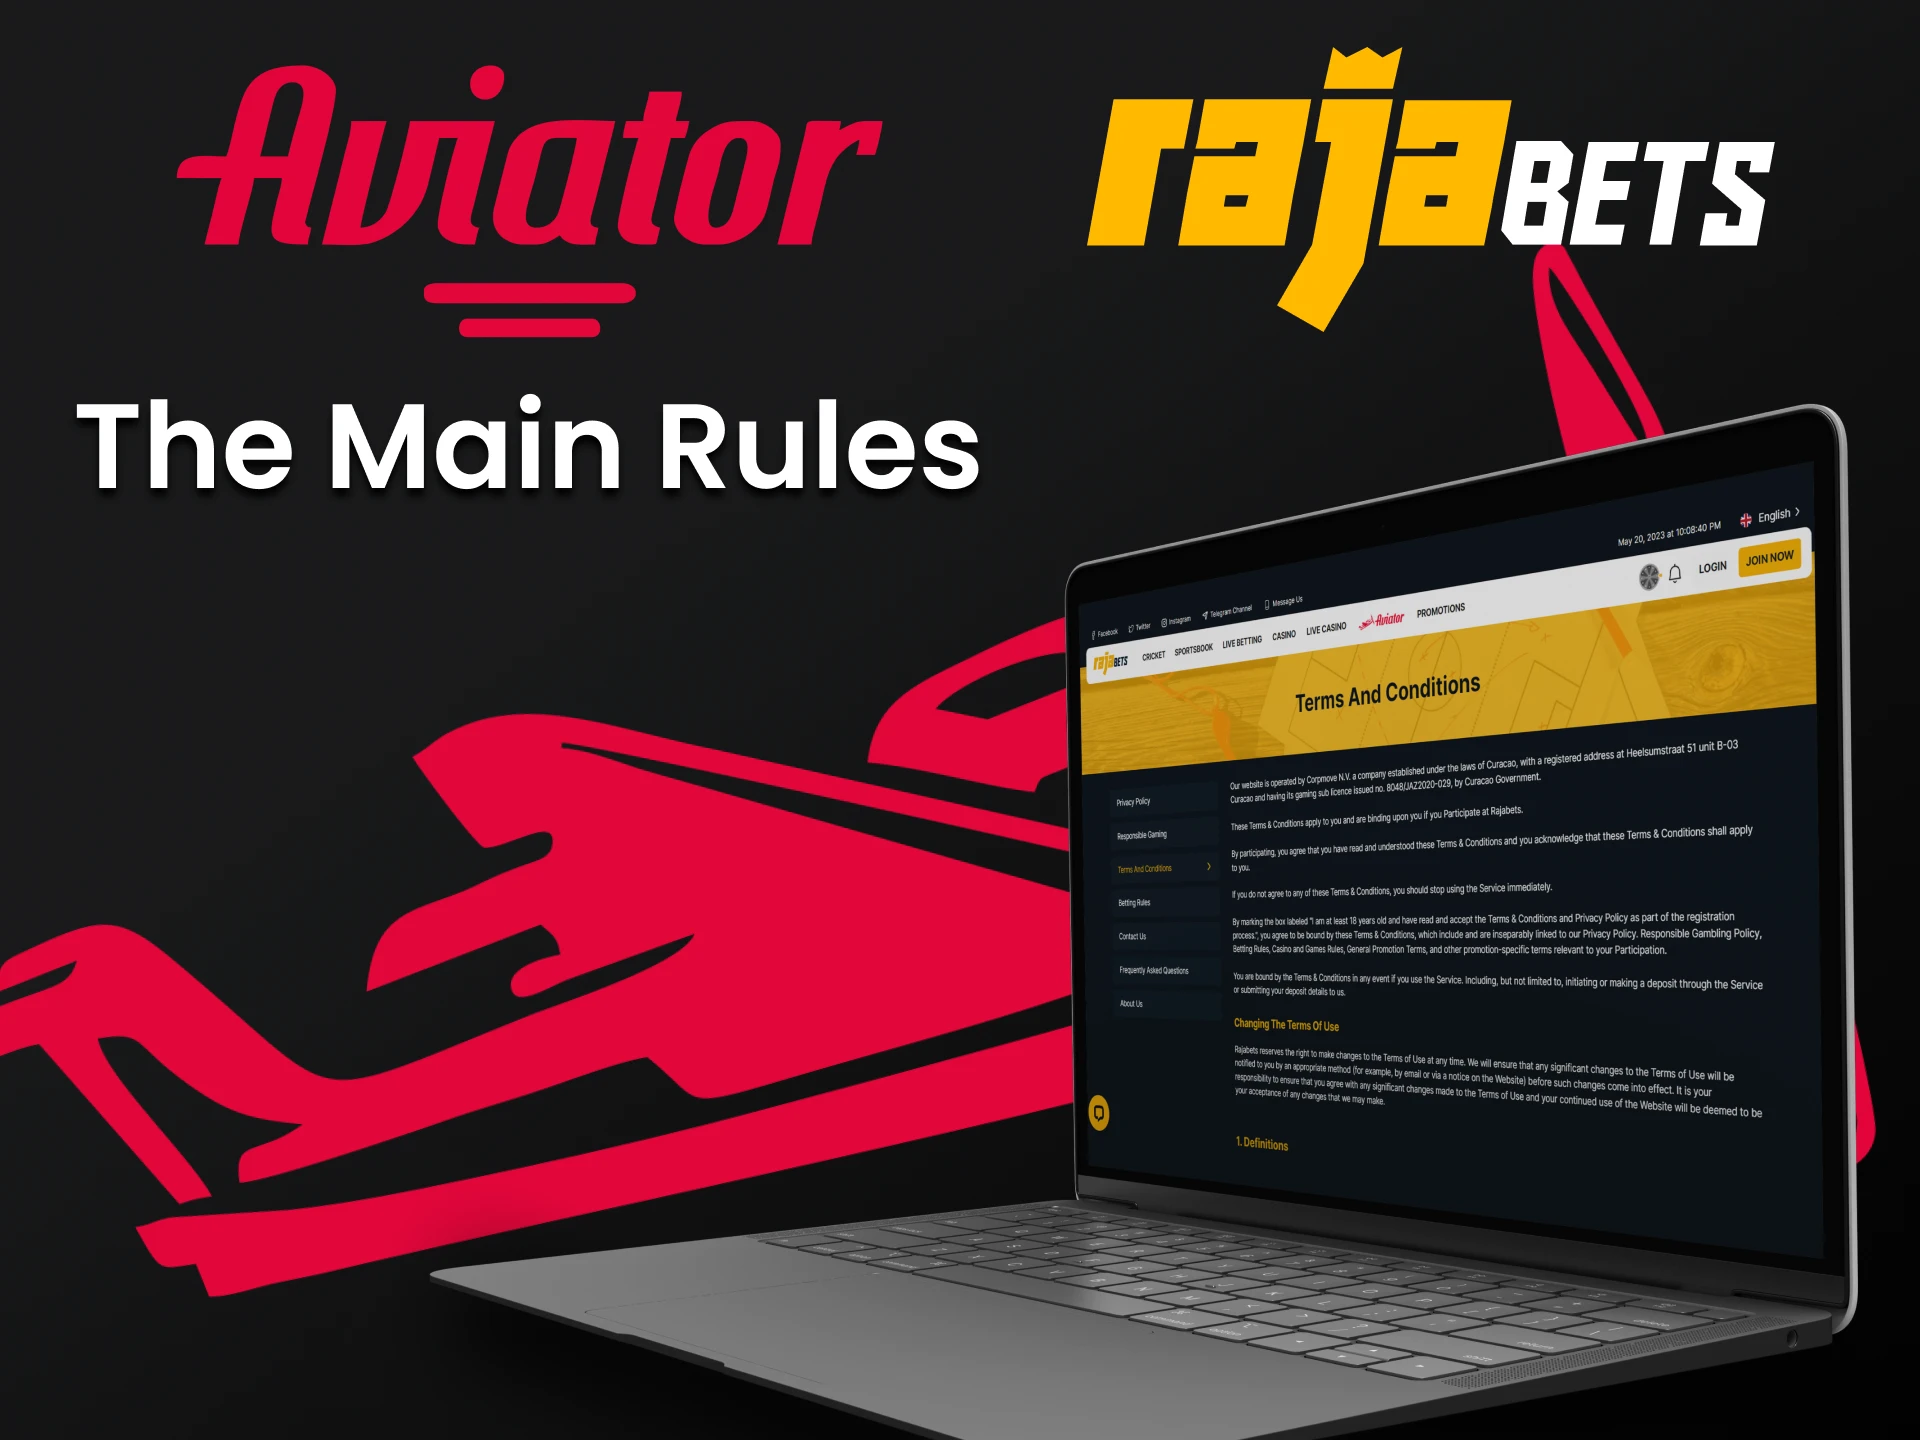 Learn about the rules of the Rajabets service.